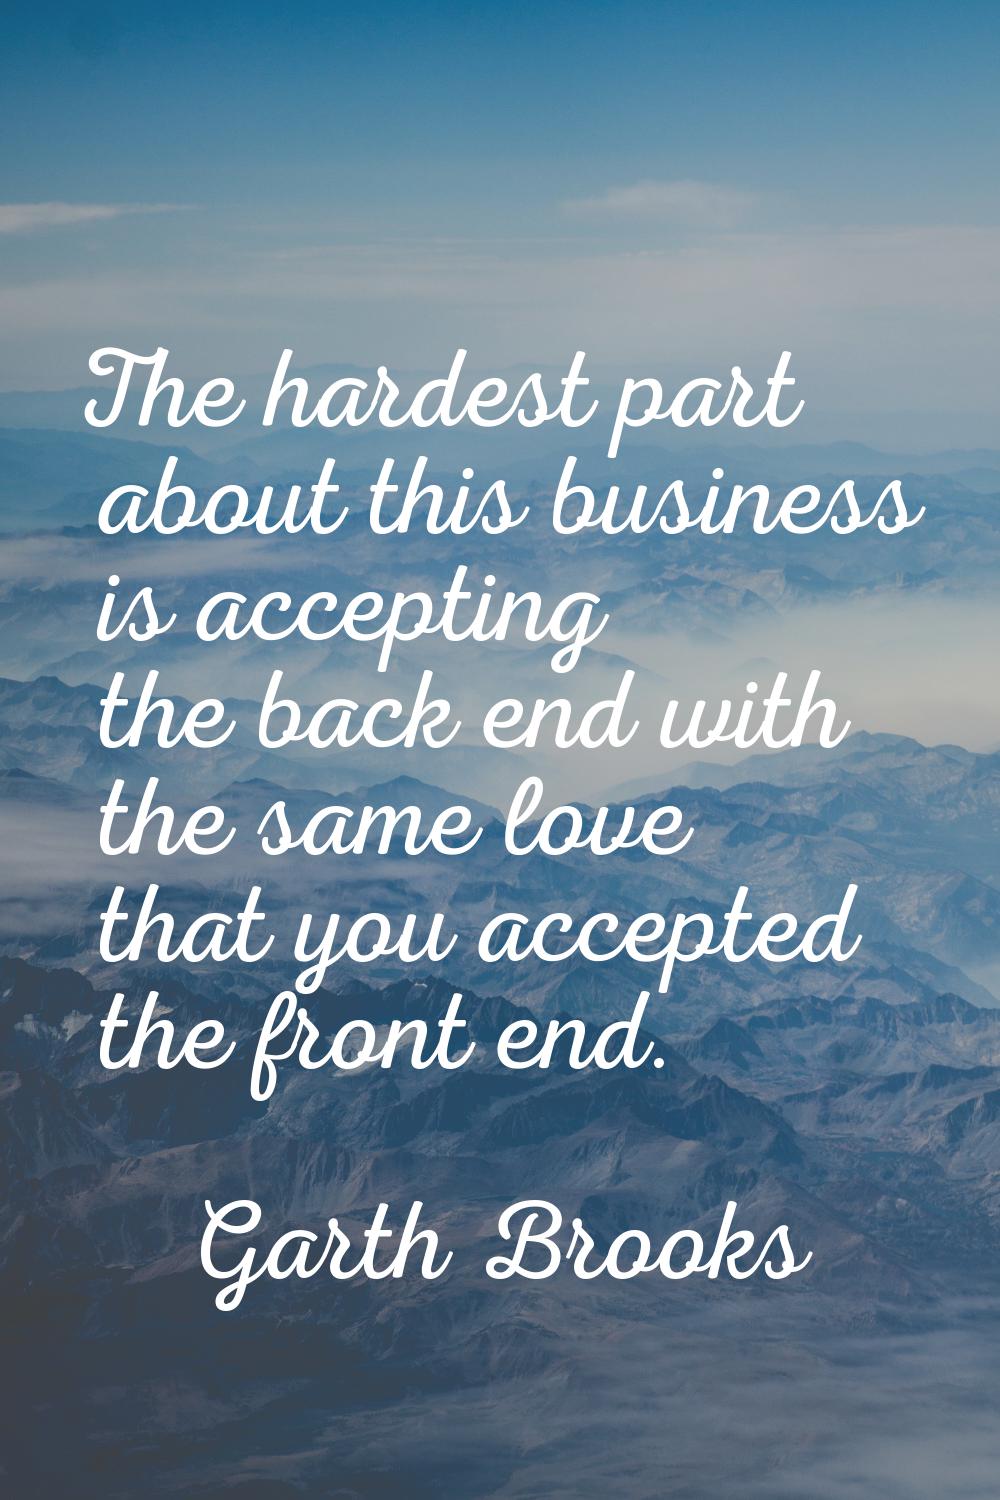 The hardest part about this business is accepting the back end with the same love that you accepted